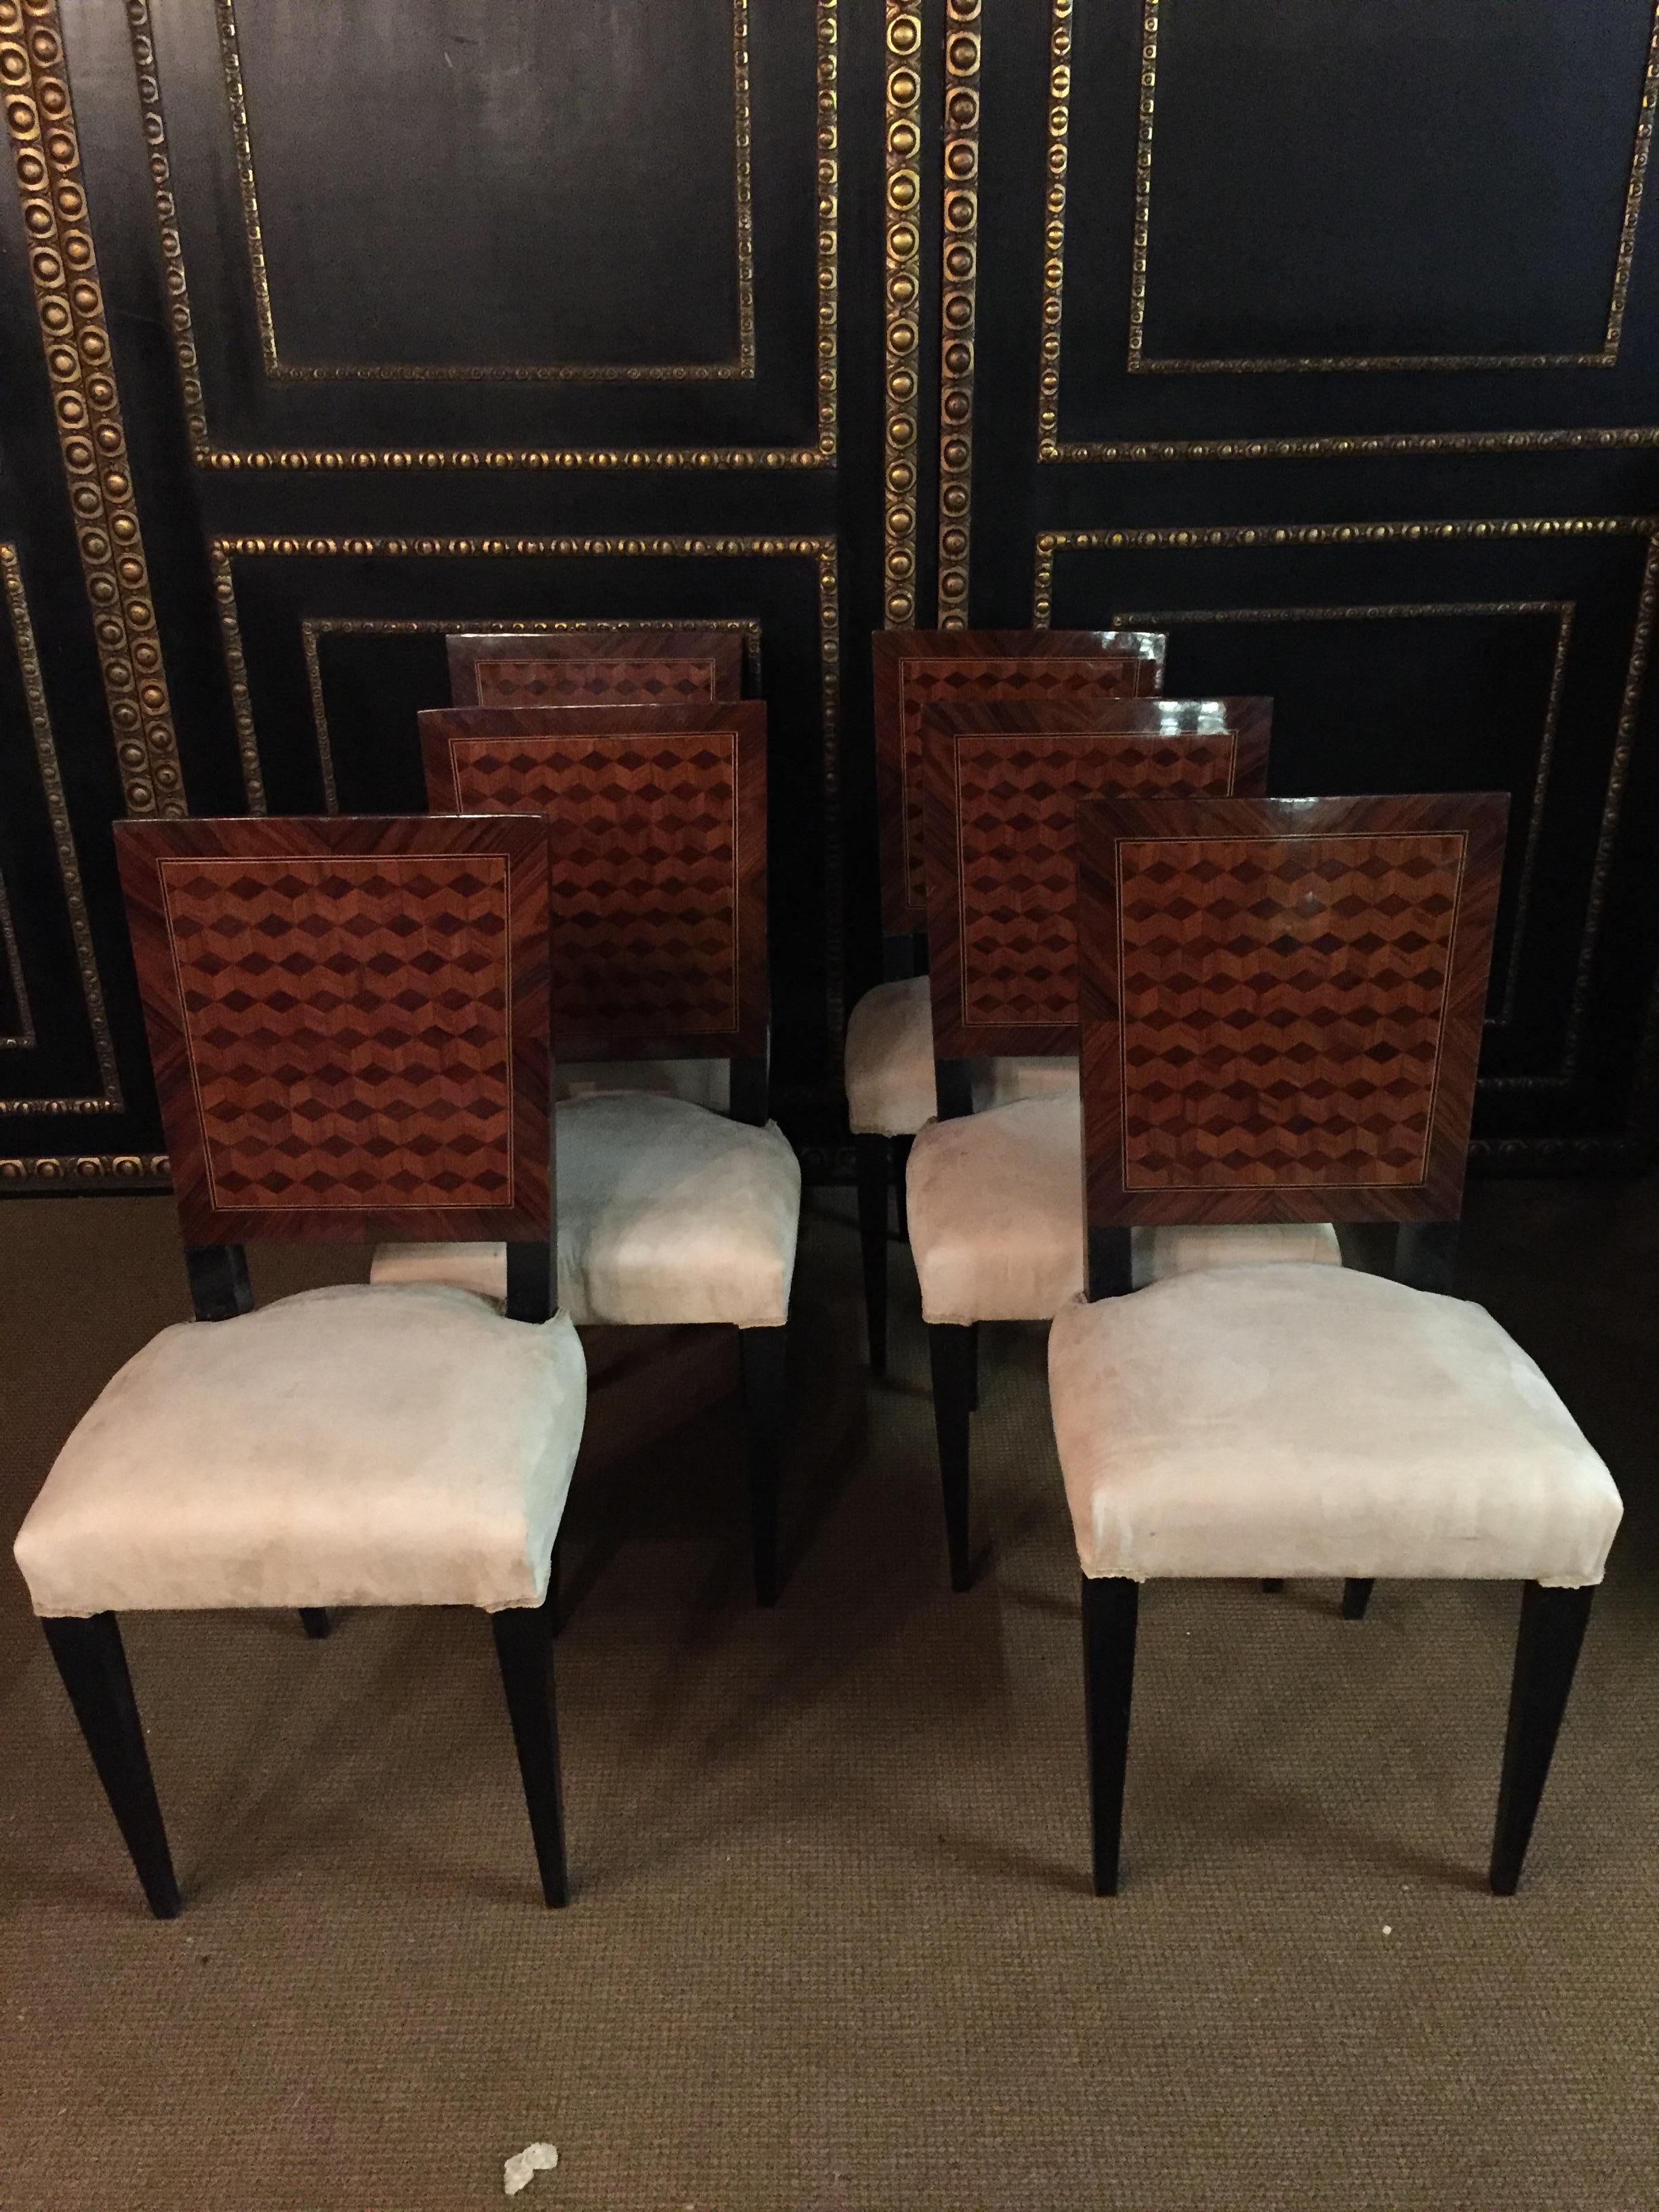 Classical French chairs in the Art Deco Stil.
Solid beech wood with mahogany veneer.
Backrest front and back with beautiful inlaid work.
Seat upholstered and covered.